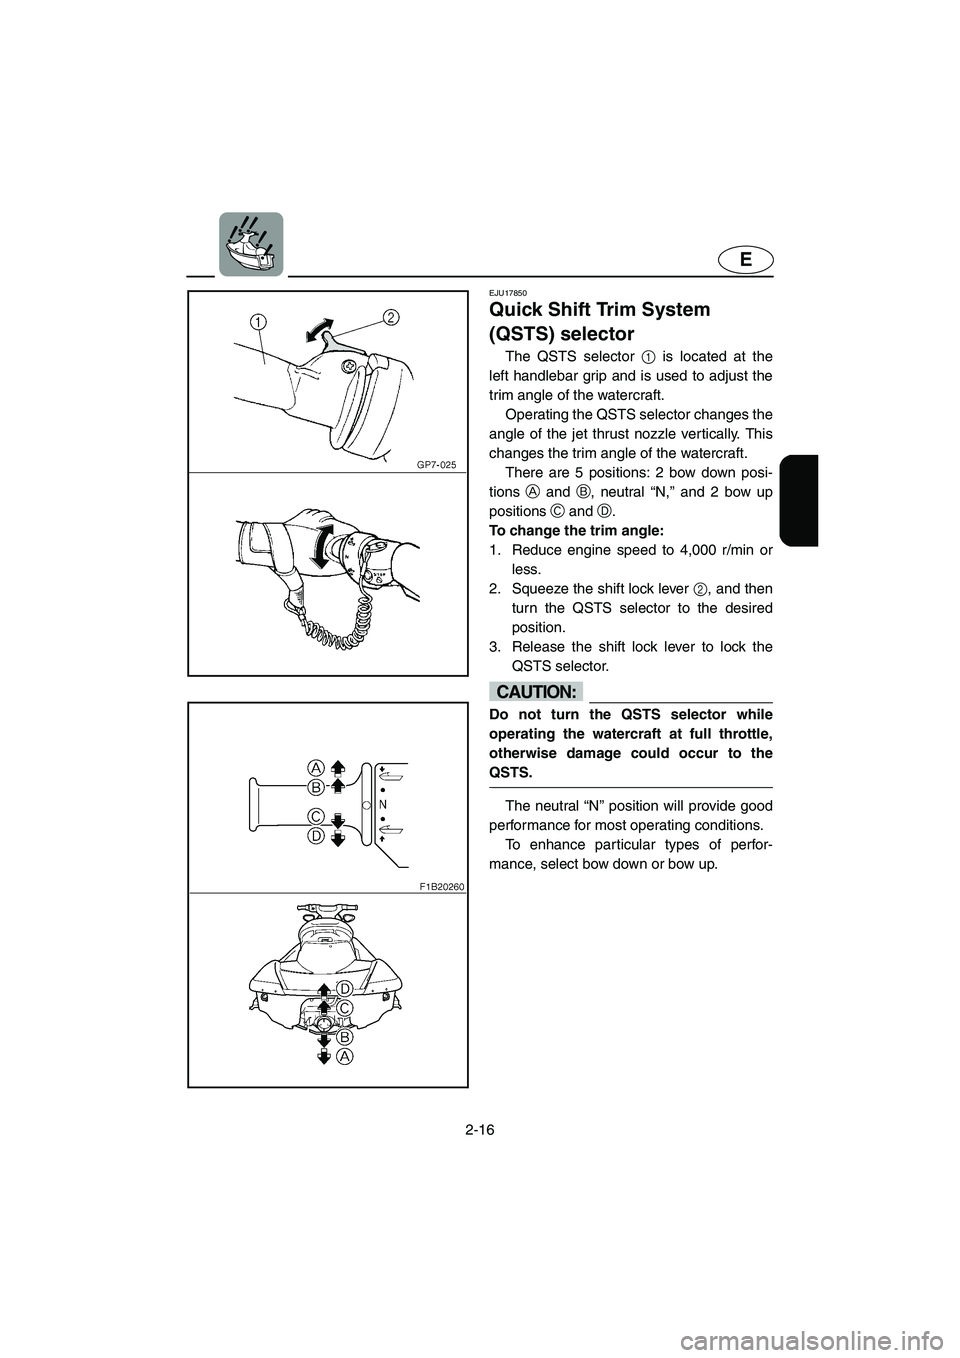 YAMAHA FX HO CRUISER 2006 Service Manual 2-16
E
EJU17850  
Quick Shift Trim System 
(QSTS) selector  
The QSTS selector 1 is located at the
left handlebar grip and is used to adjust the
trim angle of the watercraft. 
Operating the QSTS selec